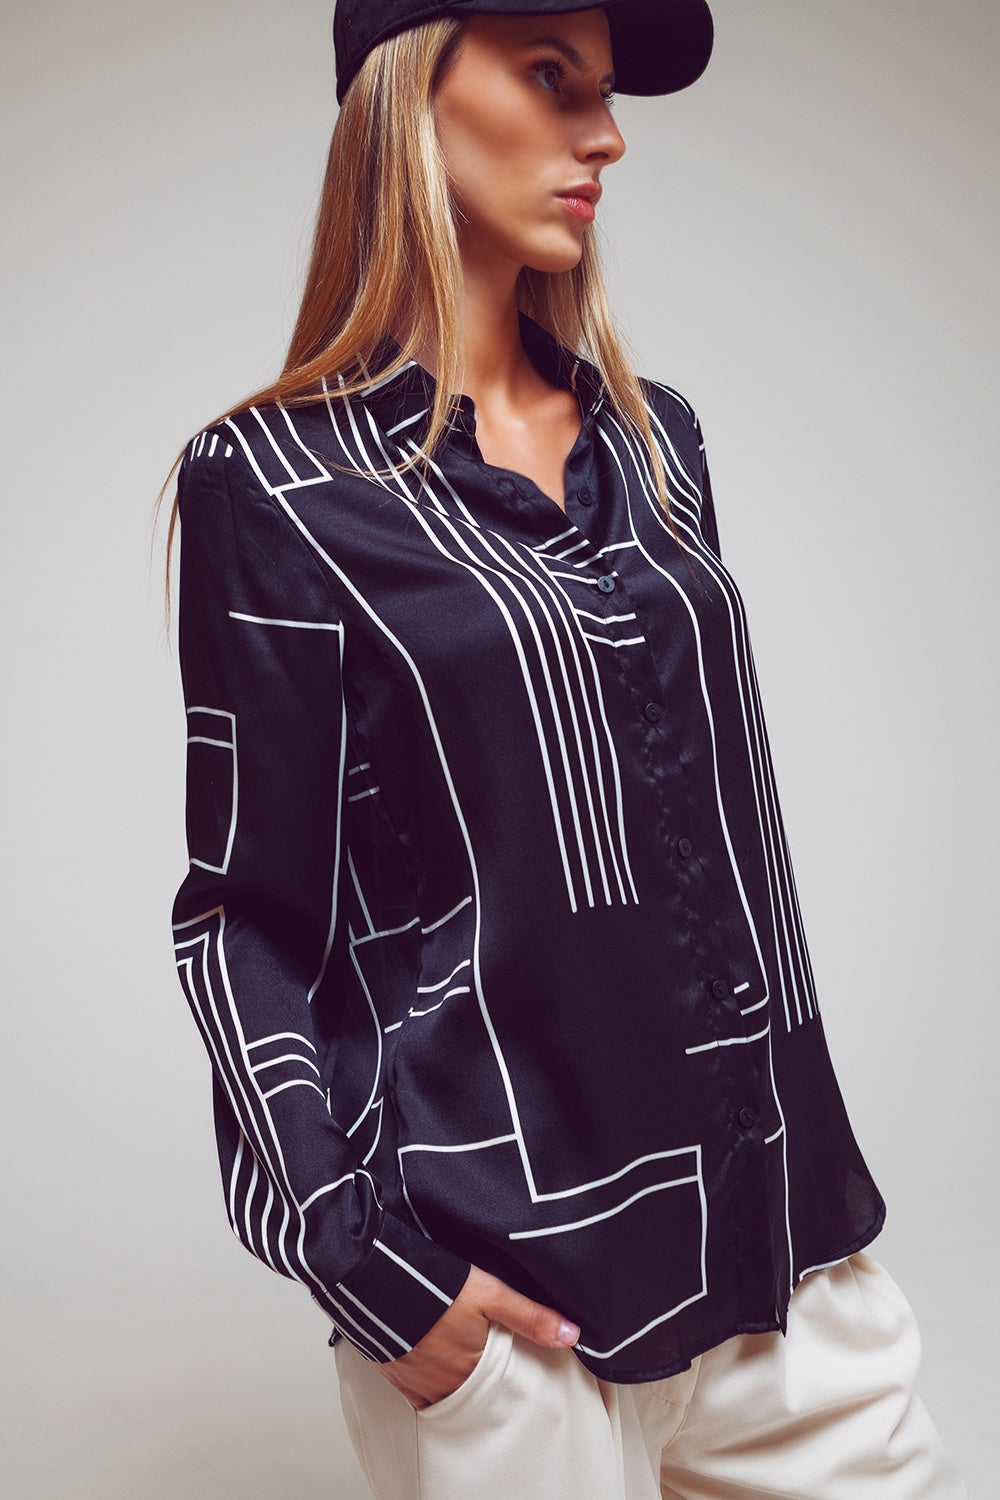 Long Sleeve Satin Shirt With Black and White Abstract Print - Szua Store